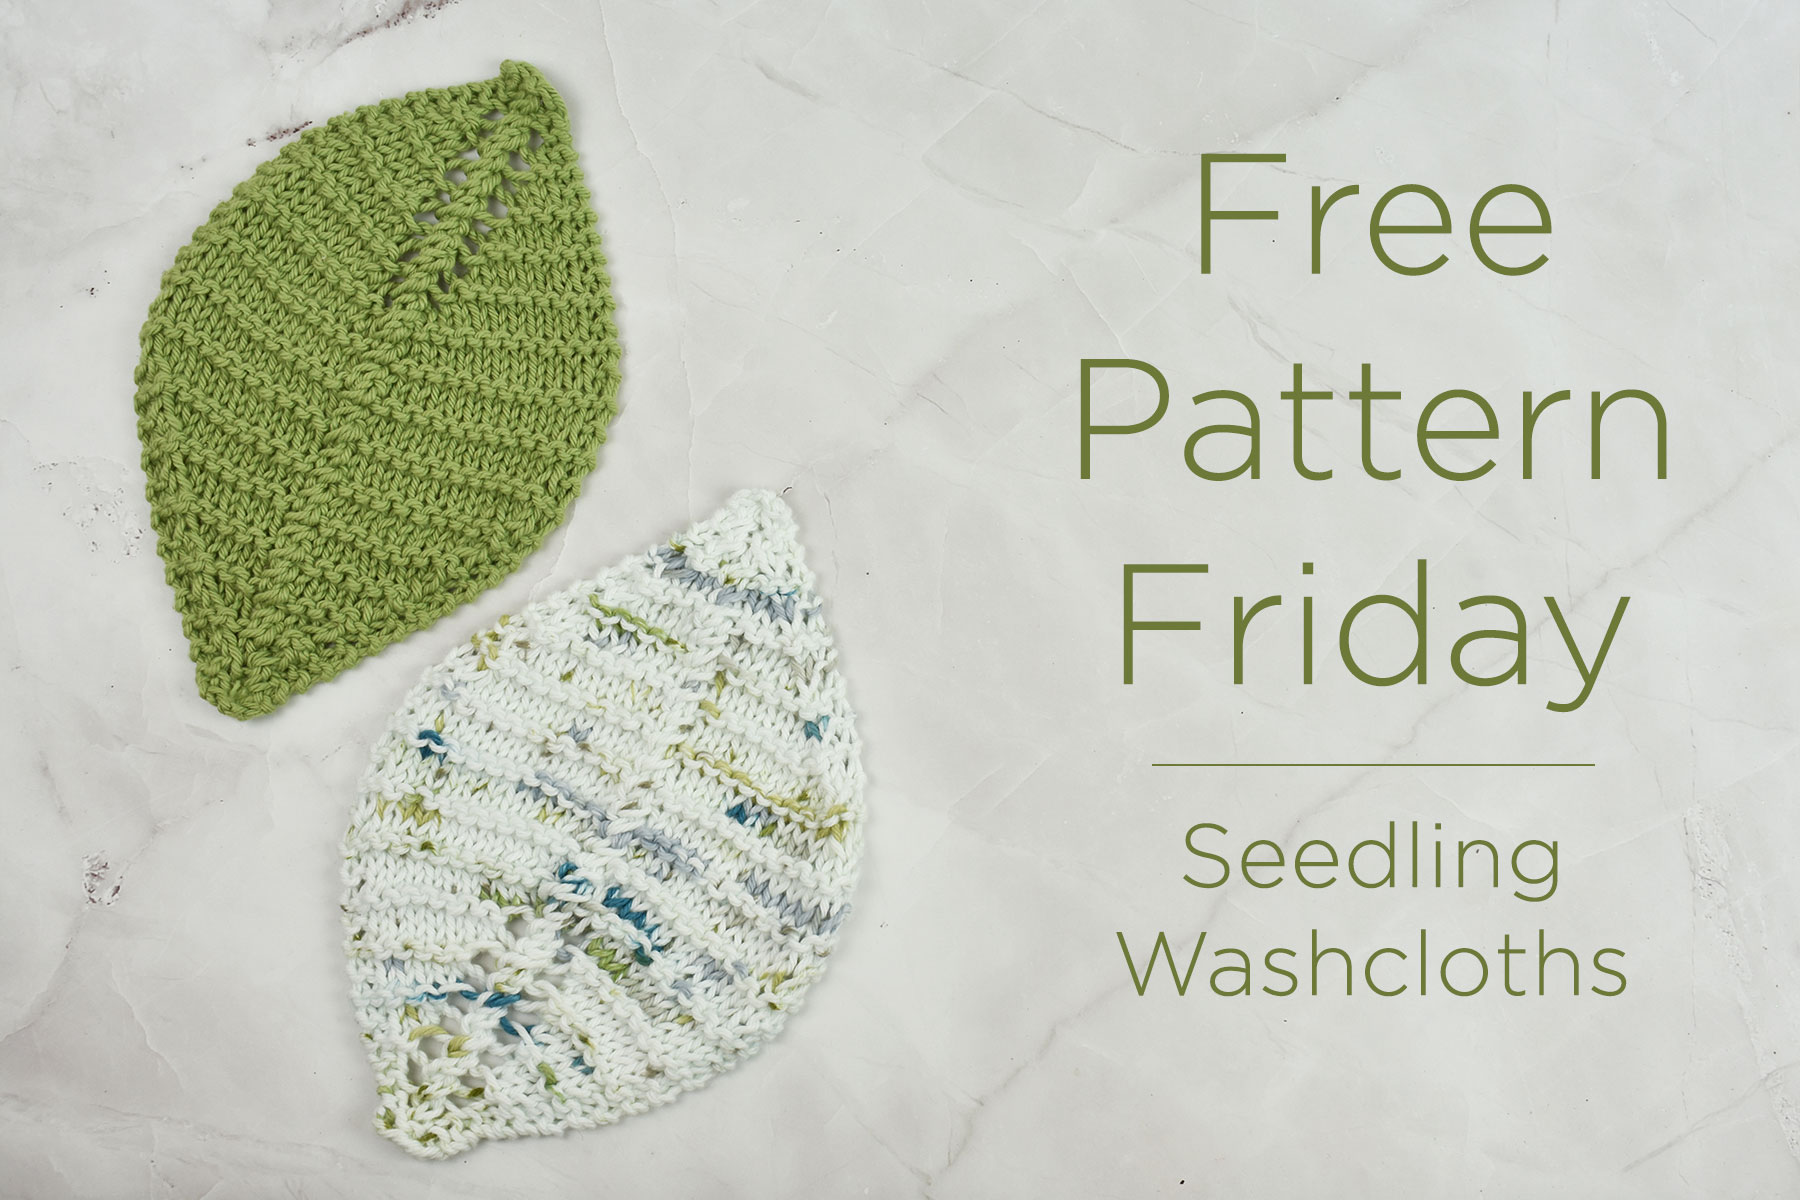 Photo of the Seedling Washcloths in Cotton Supreme and Cotton Supreme Speckles with the text "Free Pattern Friday - Seedling Washcloths" to the right of the washcloths.